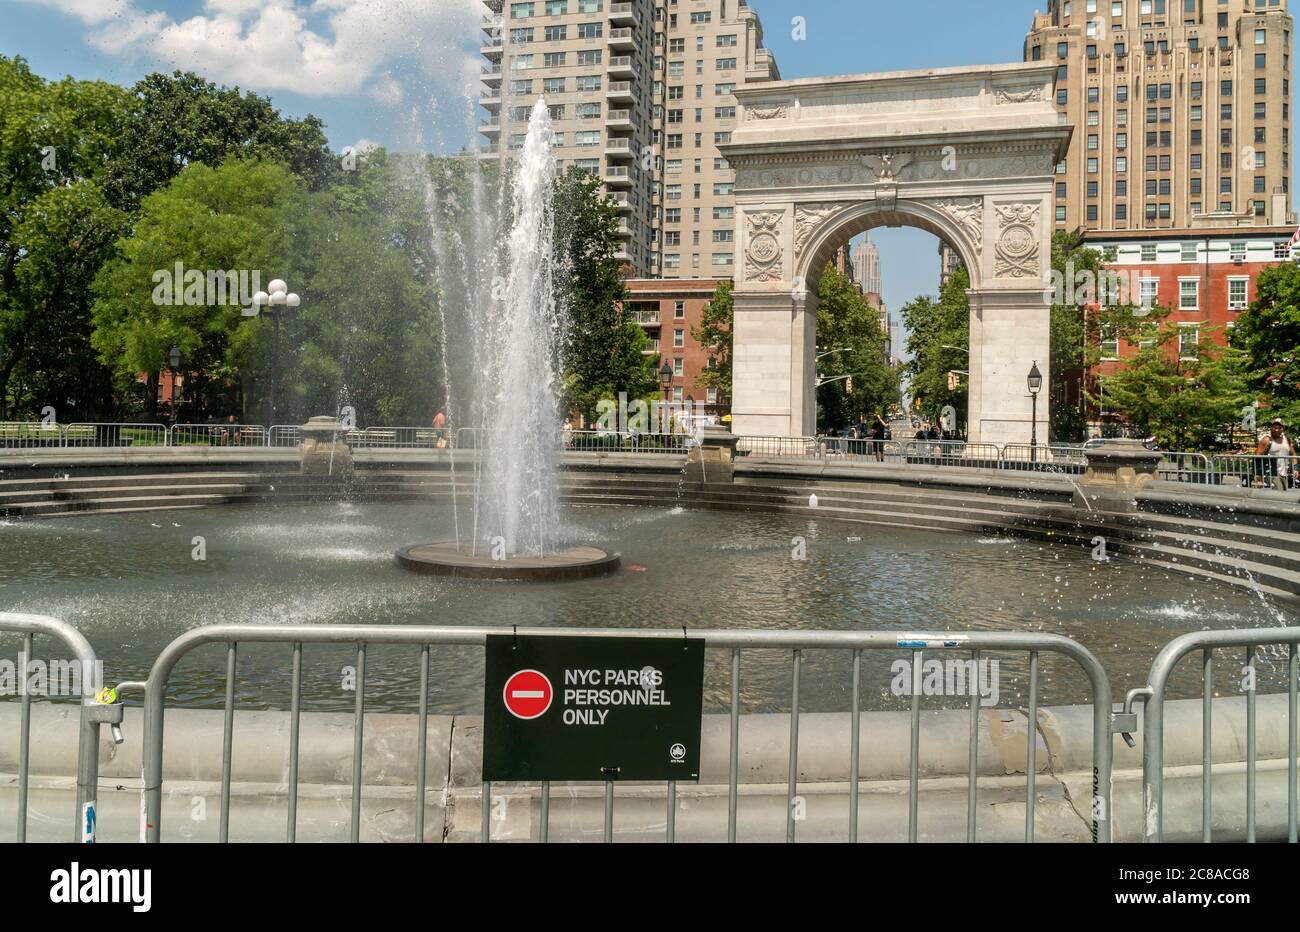 Despite the excessive heat the Washington Square Park fountain remains closed to frolicking, in Greenwich Village in New York on Sunday, July 19, 2020. The city is suffering through min-90s temperatures with Monday’s expected “real-feel” temperature passing 100 degrees. . (© Richard B. Levine) Stock Photo